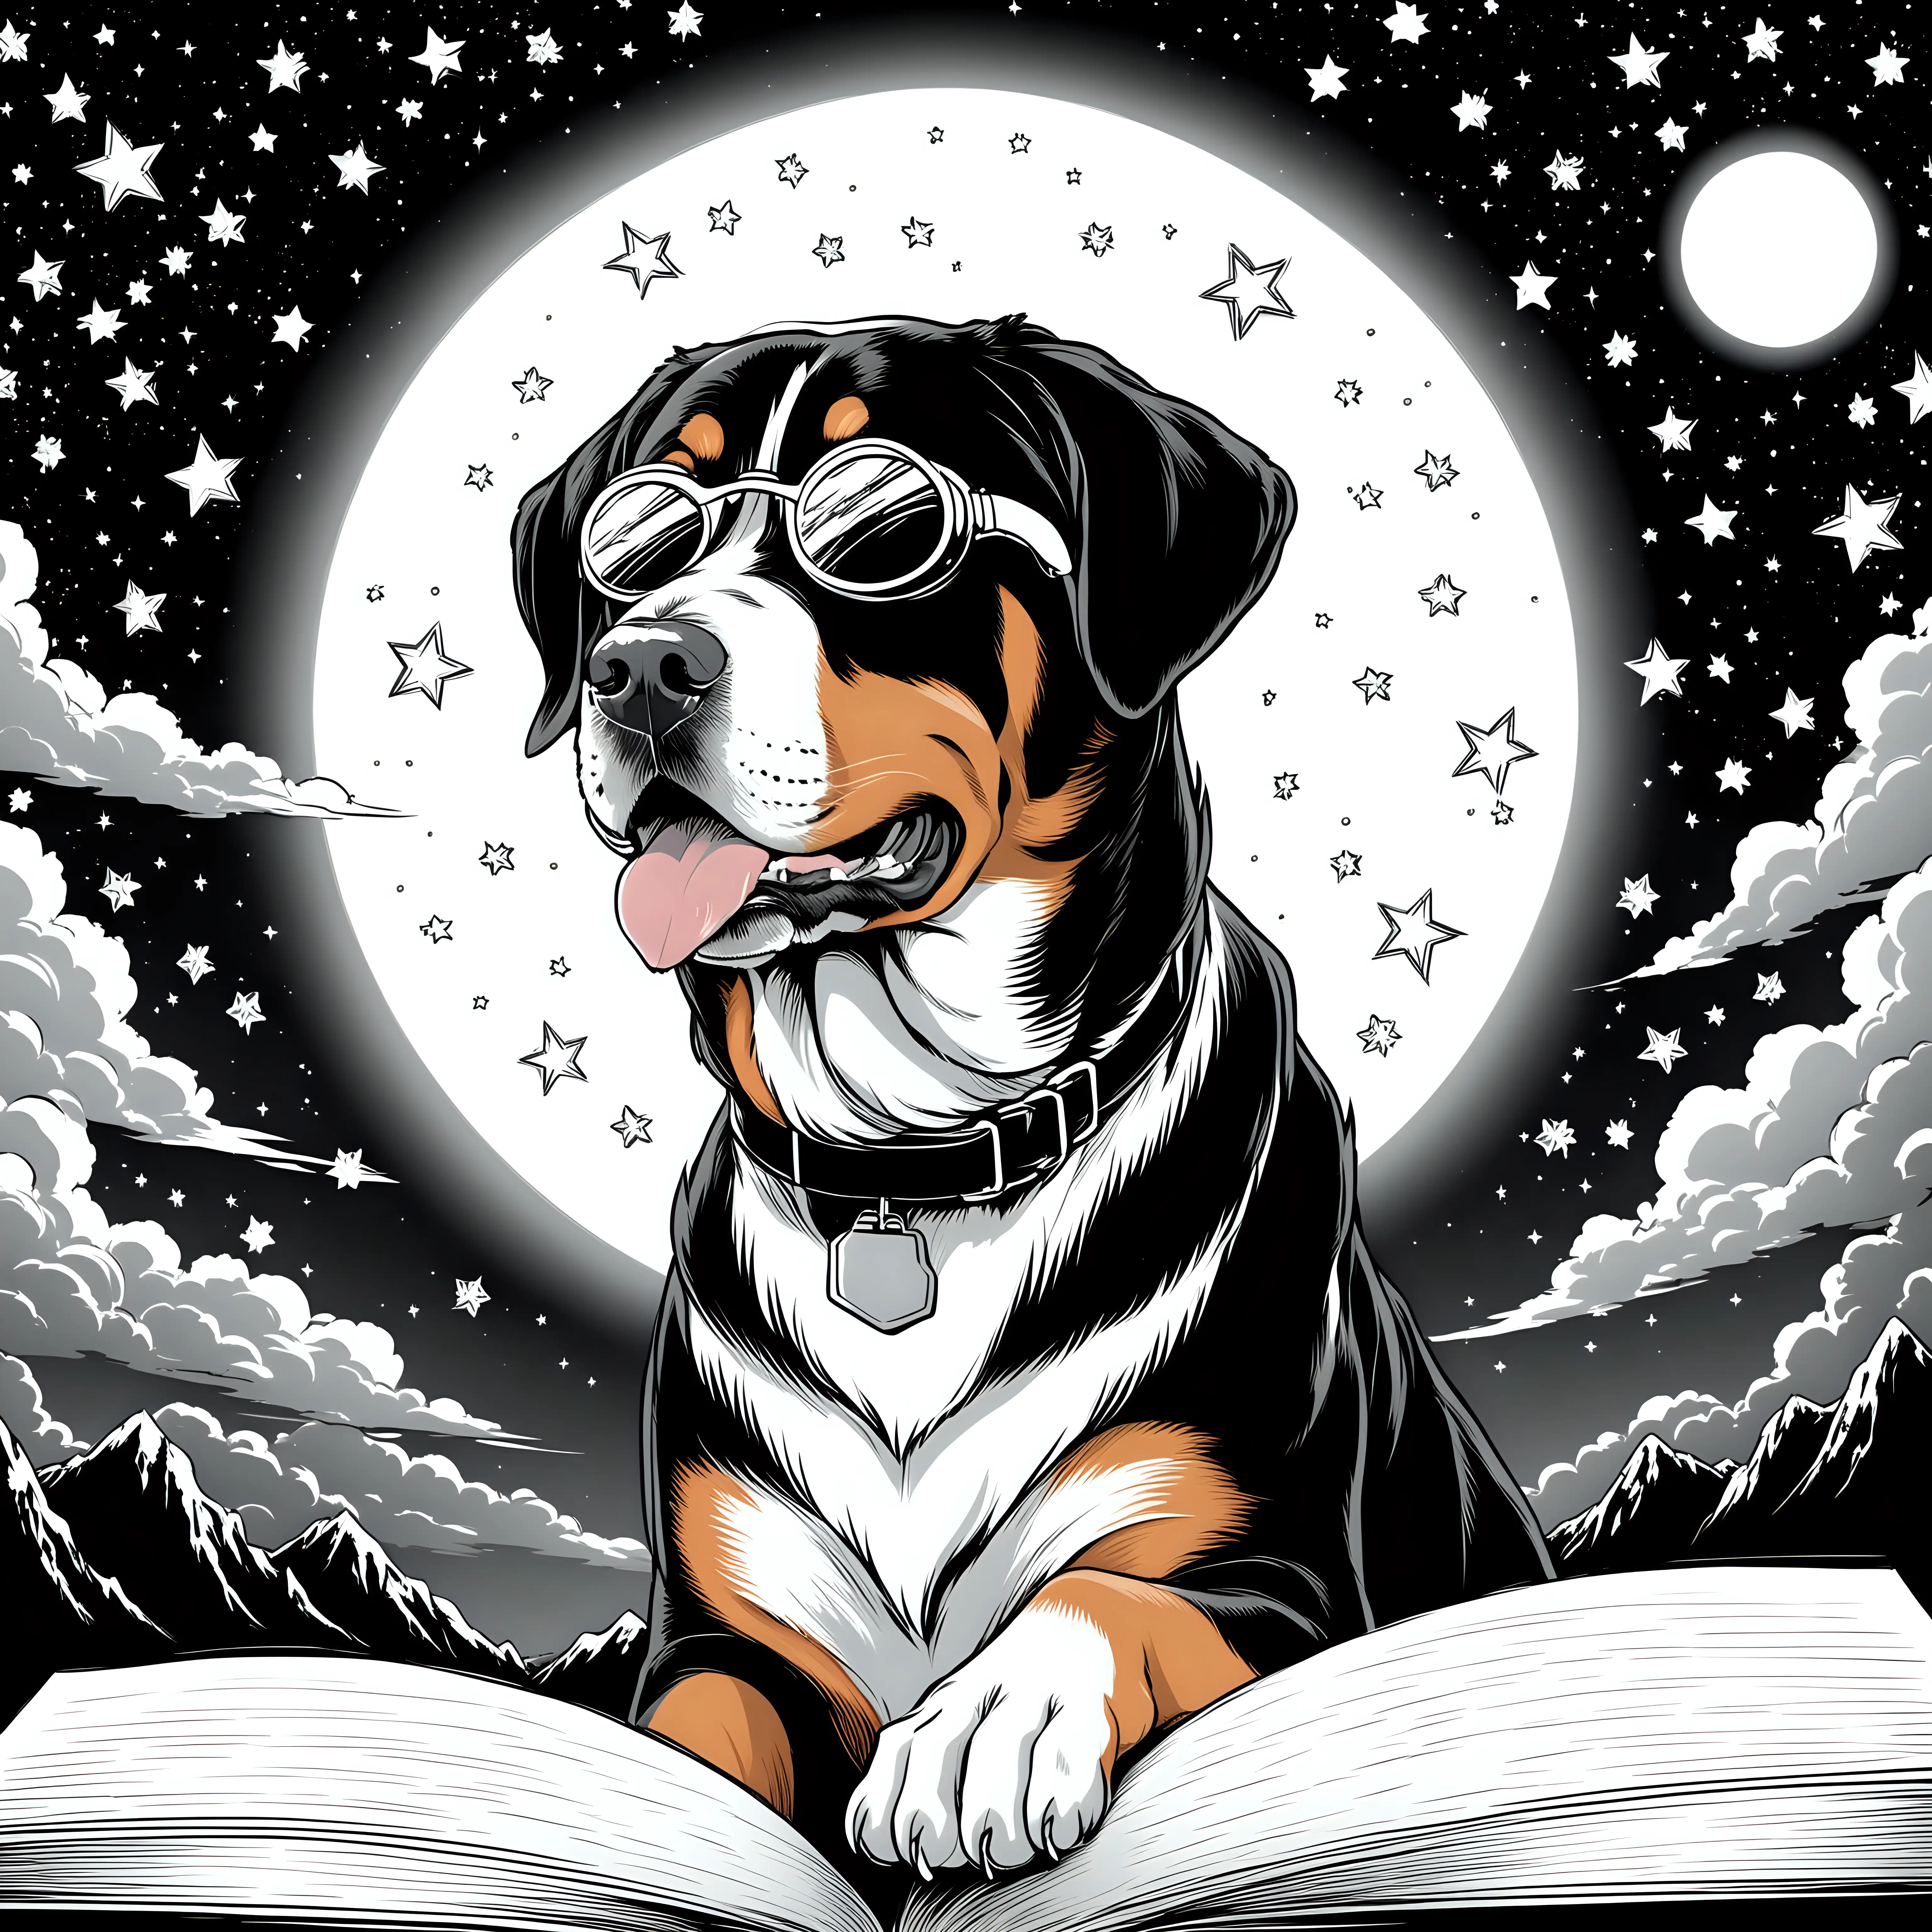 Greater swiss mountain dog,  wearing eclipse glasses, looking at the sun, black and white, no color, coloring book page, dramatic background,  stars